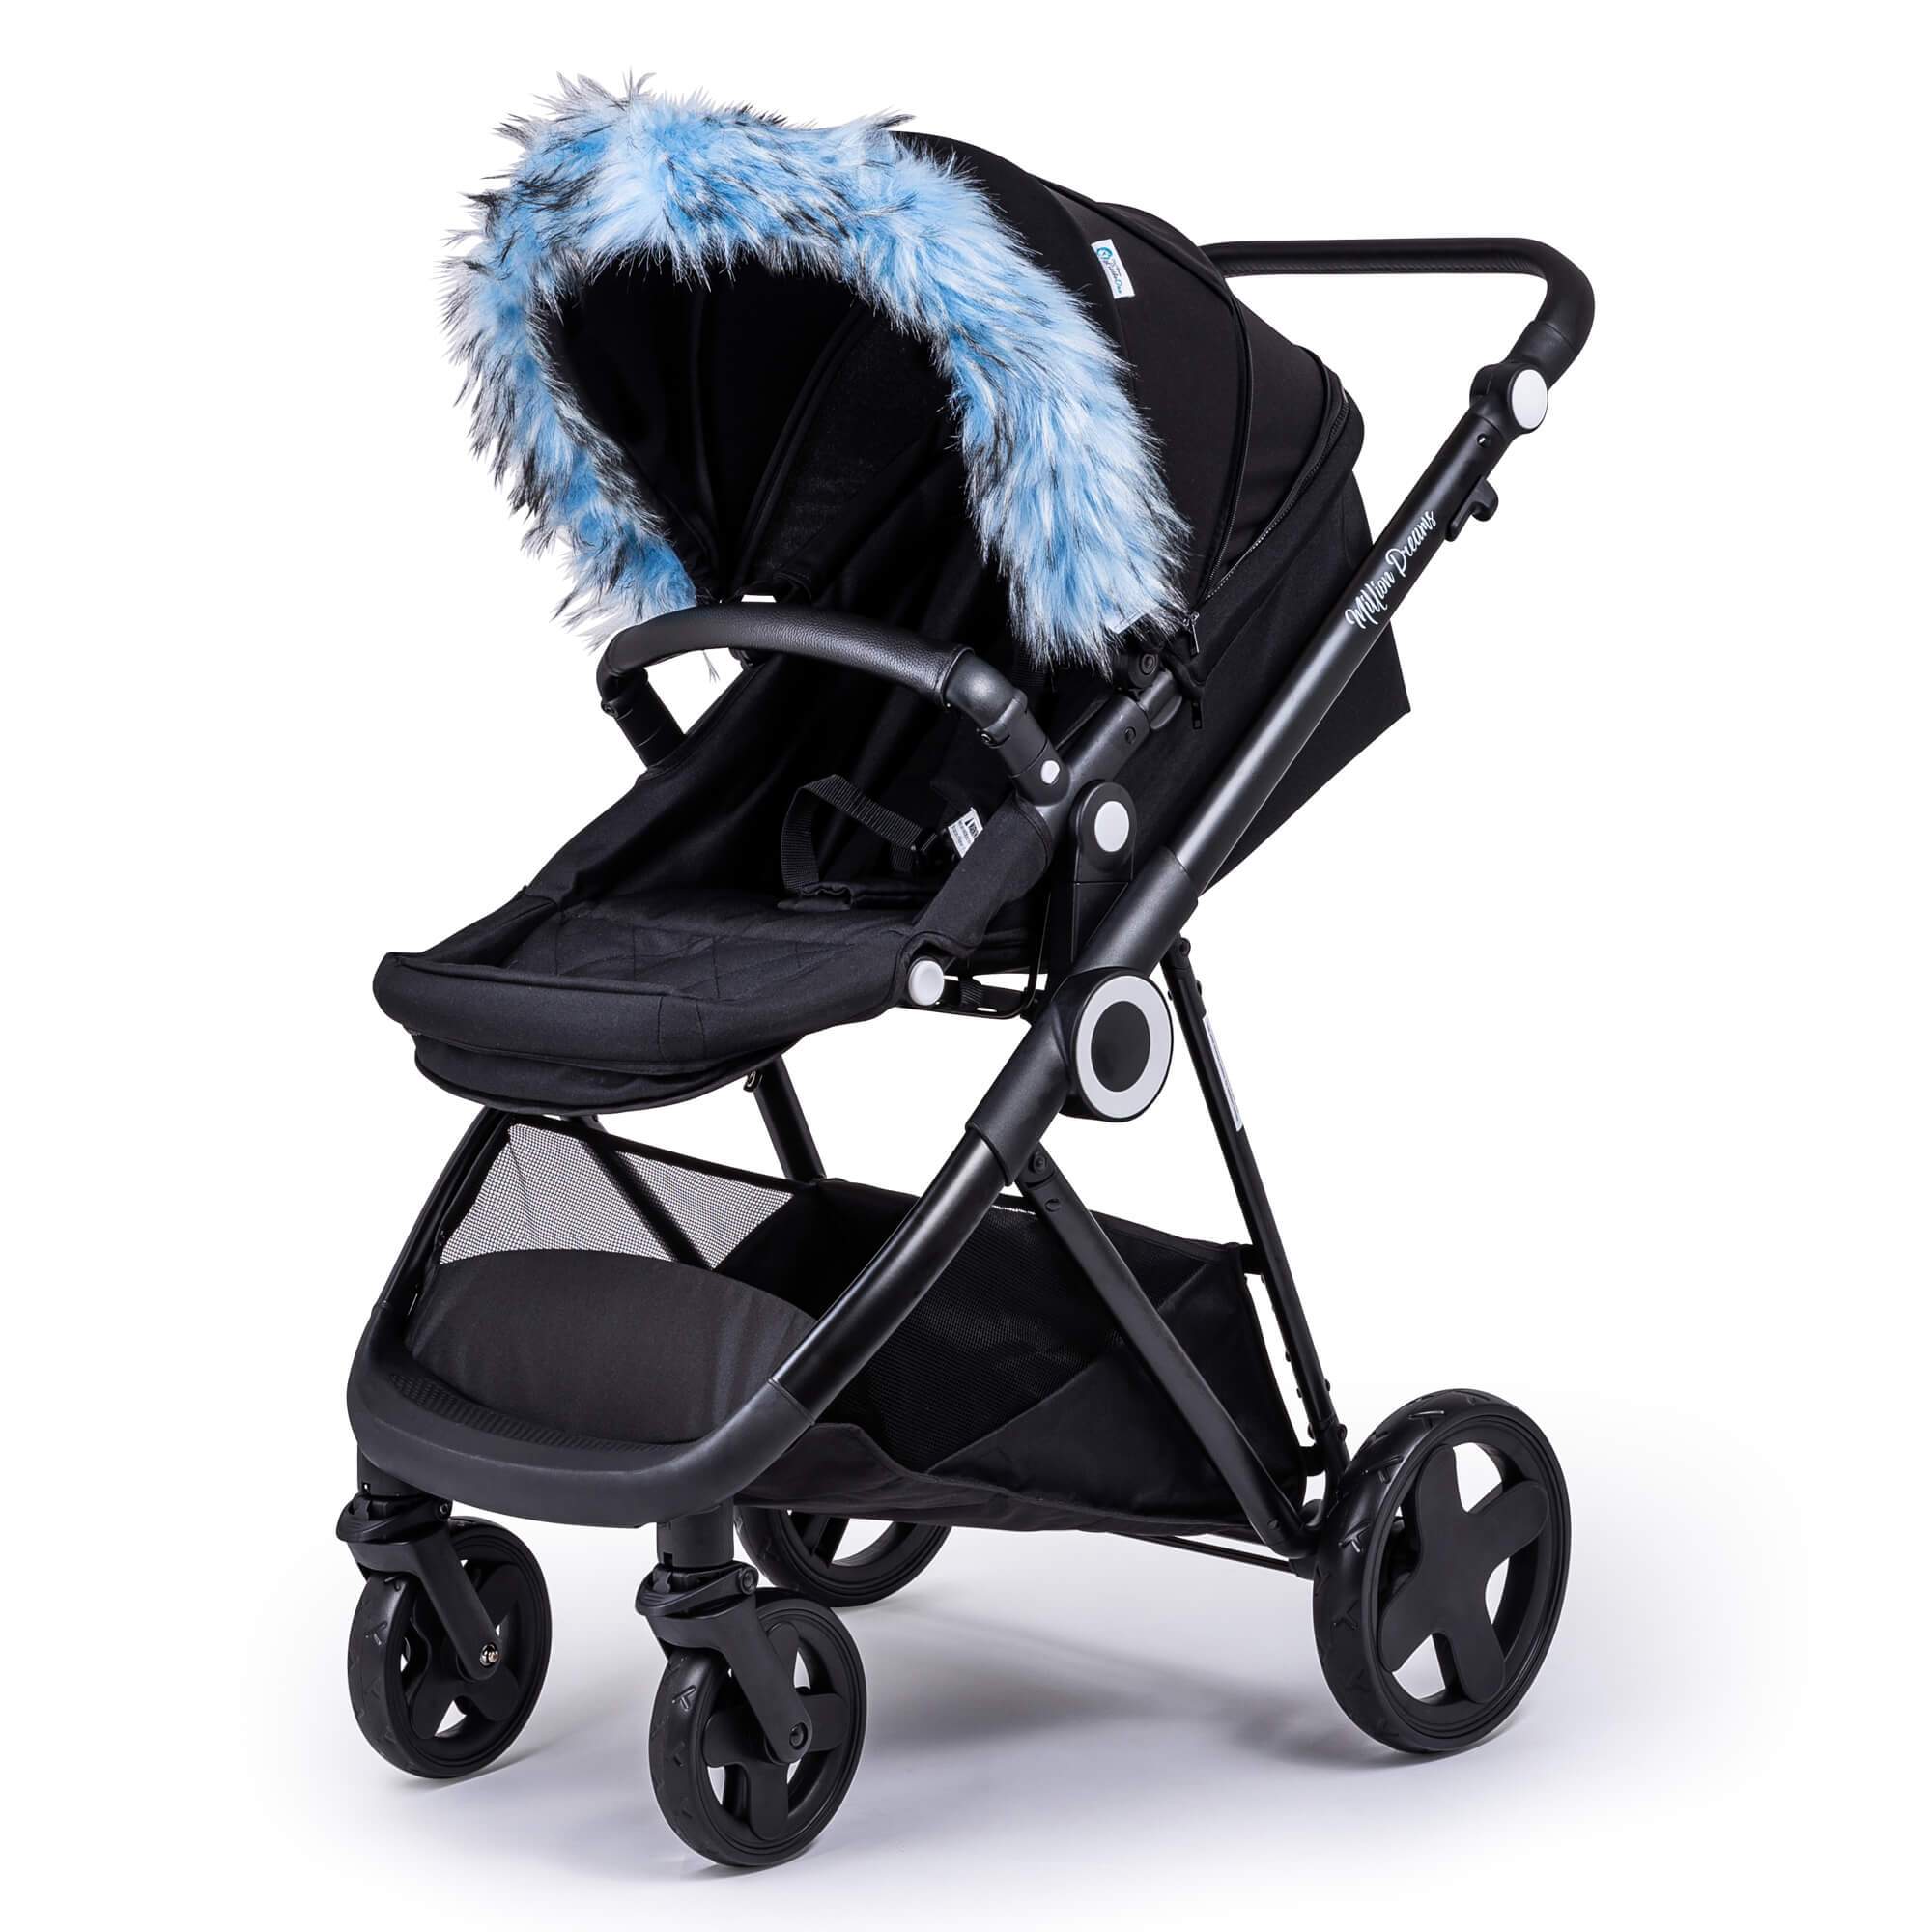 Pram Fur Hood Trim Attachment for Pushchair Compatible with BOB - Light Blue / Fits All Models | For Your Little One